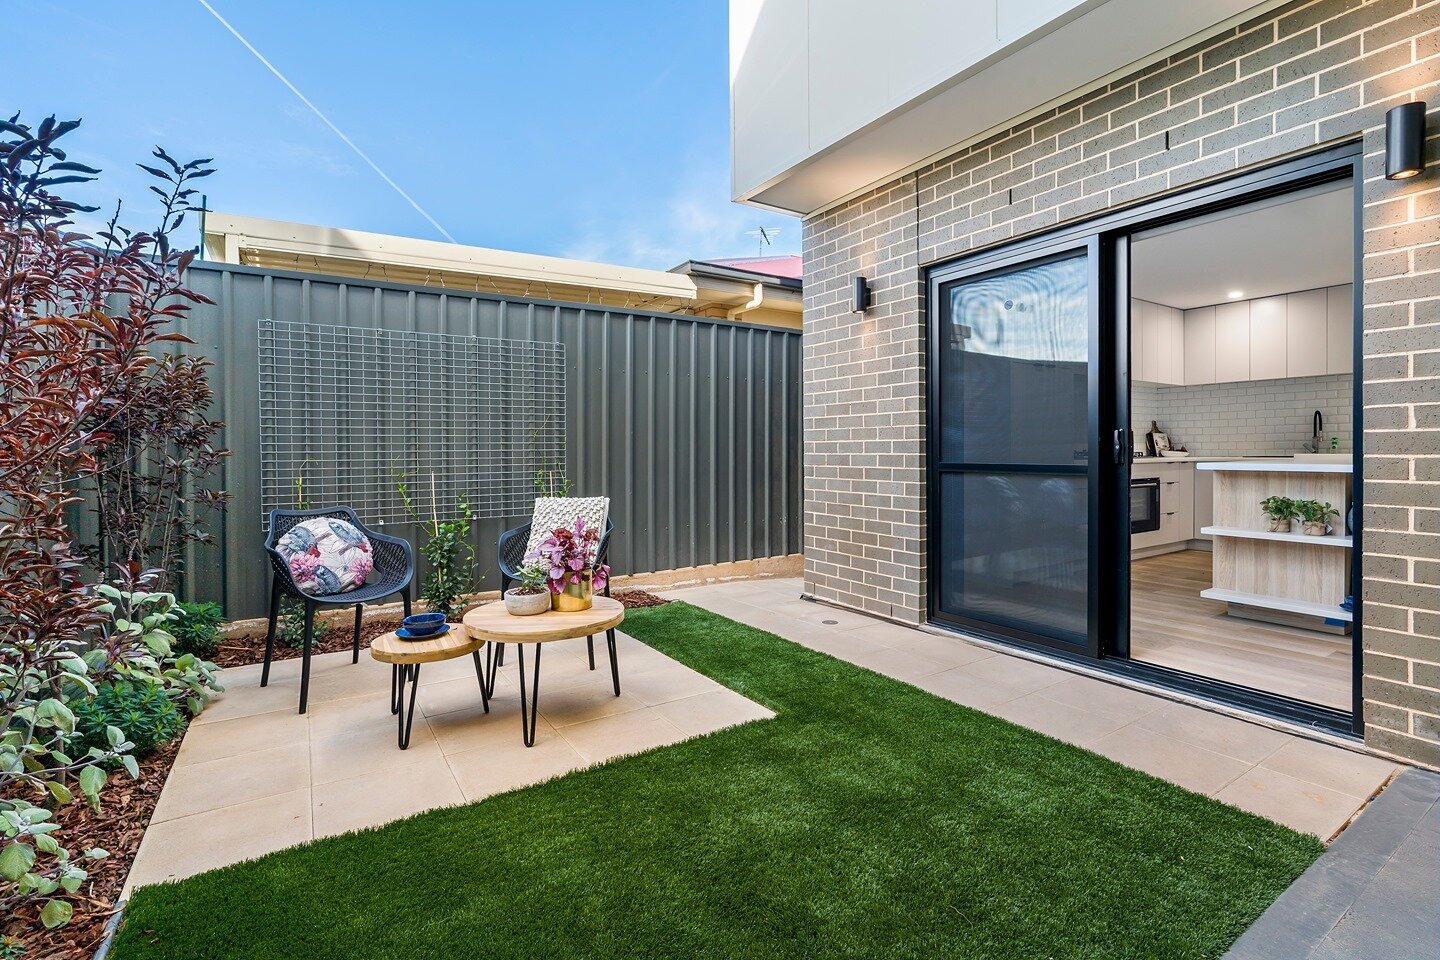 [Real Estate] Hope you get to spend some time at your relaxation spot, wherever that may, this weekend.⁠
⁠
@baylyrealestate @diakritanz #realestatephotographer #adelaidephotographer #adelaiderealestatephotographer @southaustralianphotographer #adelai